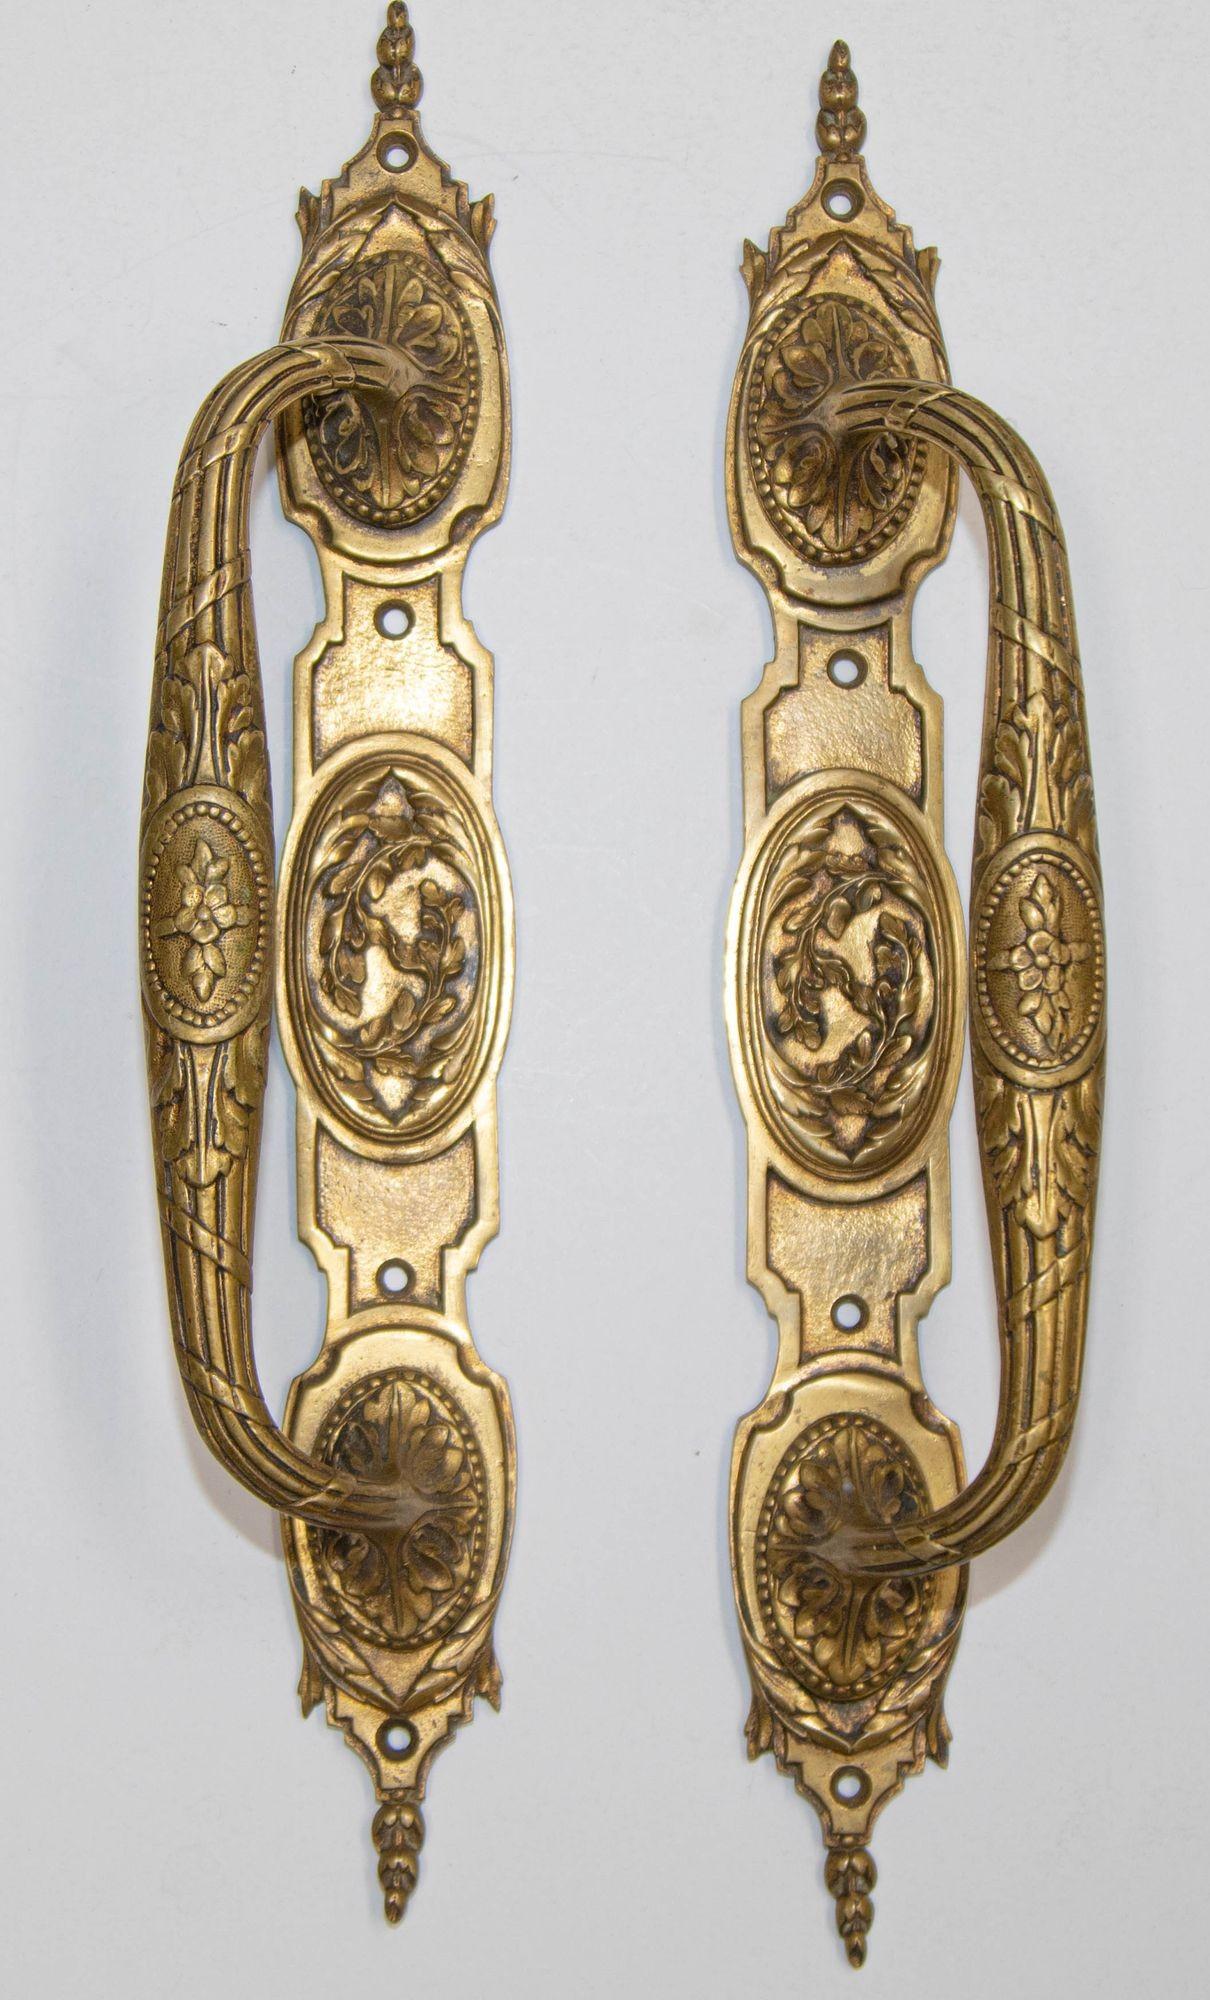 Antique Large Louis XVI Bronze Door Handles, 1900s, Set of 2.
Fabulous pair of large antique Louis XVI-style bronze door handles, from the late 19th early 20th Century.
These impressive and large French Louis XVI-style bronze push-and-pull door